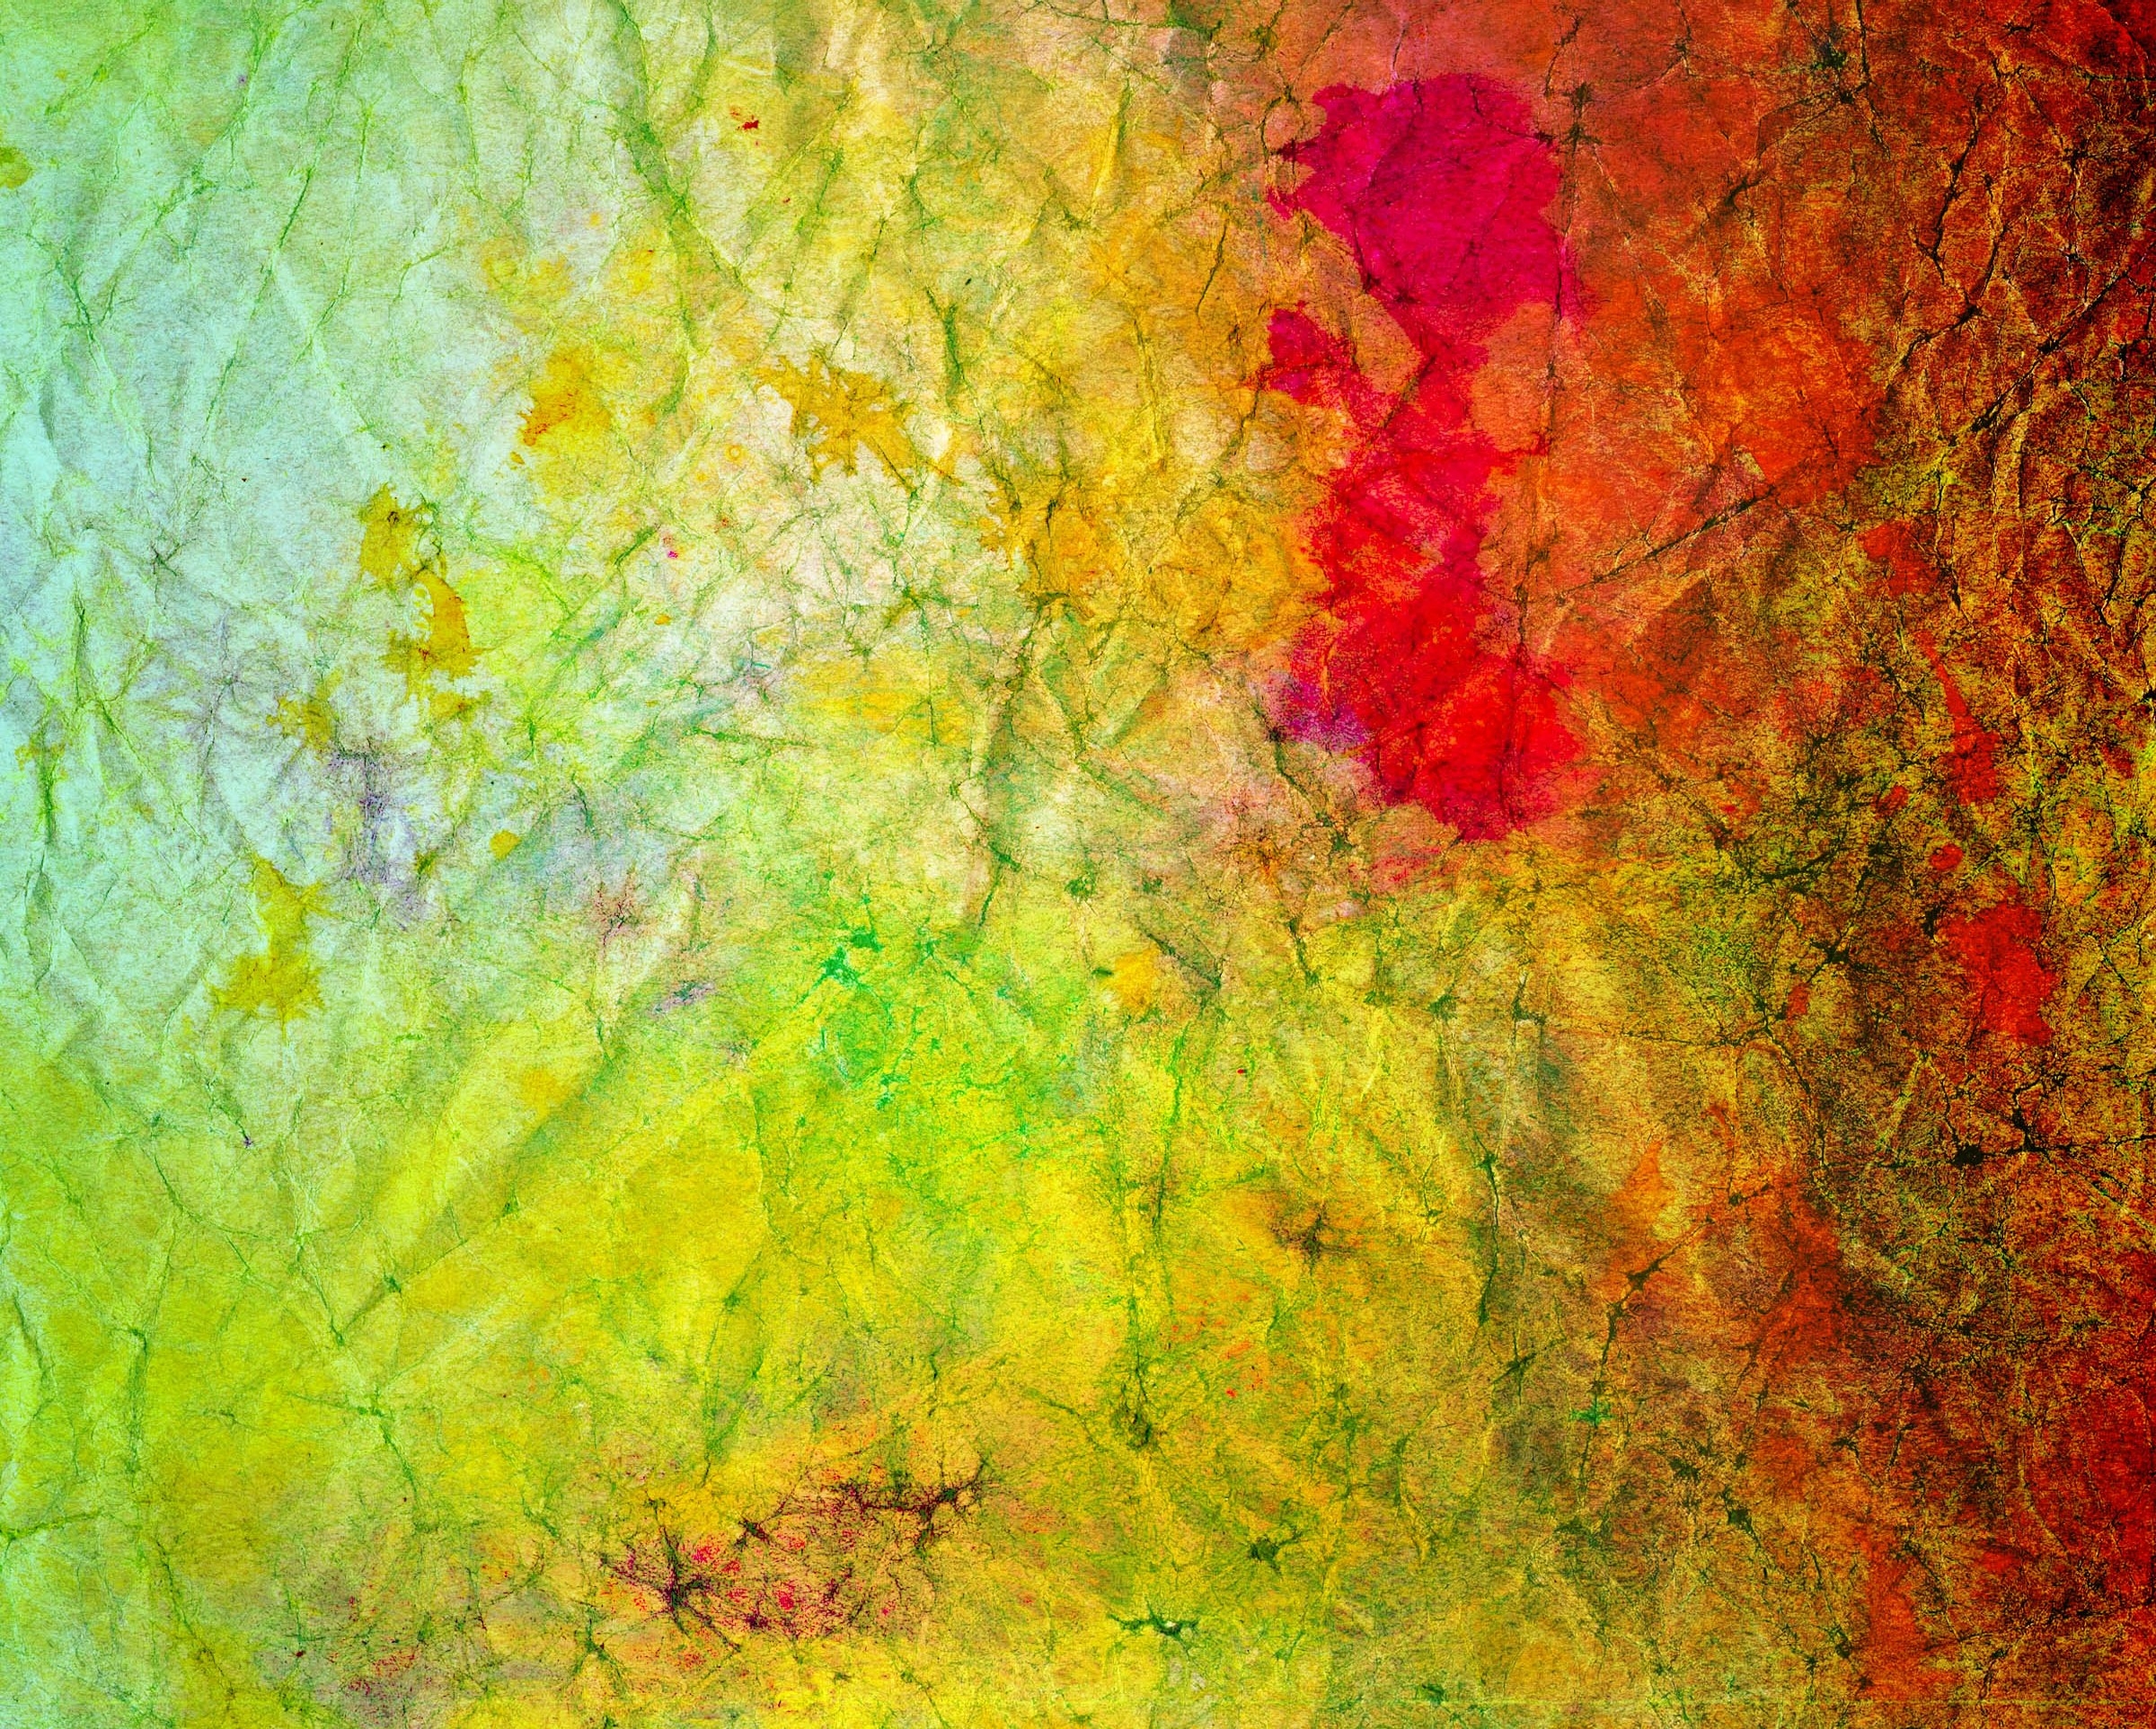 motley, multicolored, textures, background, spotted, spotty, texture